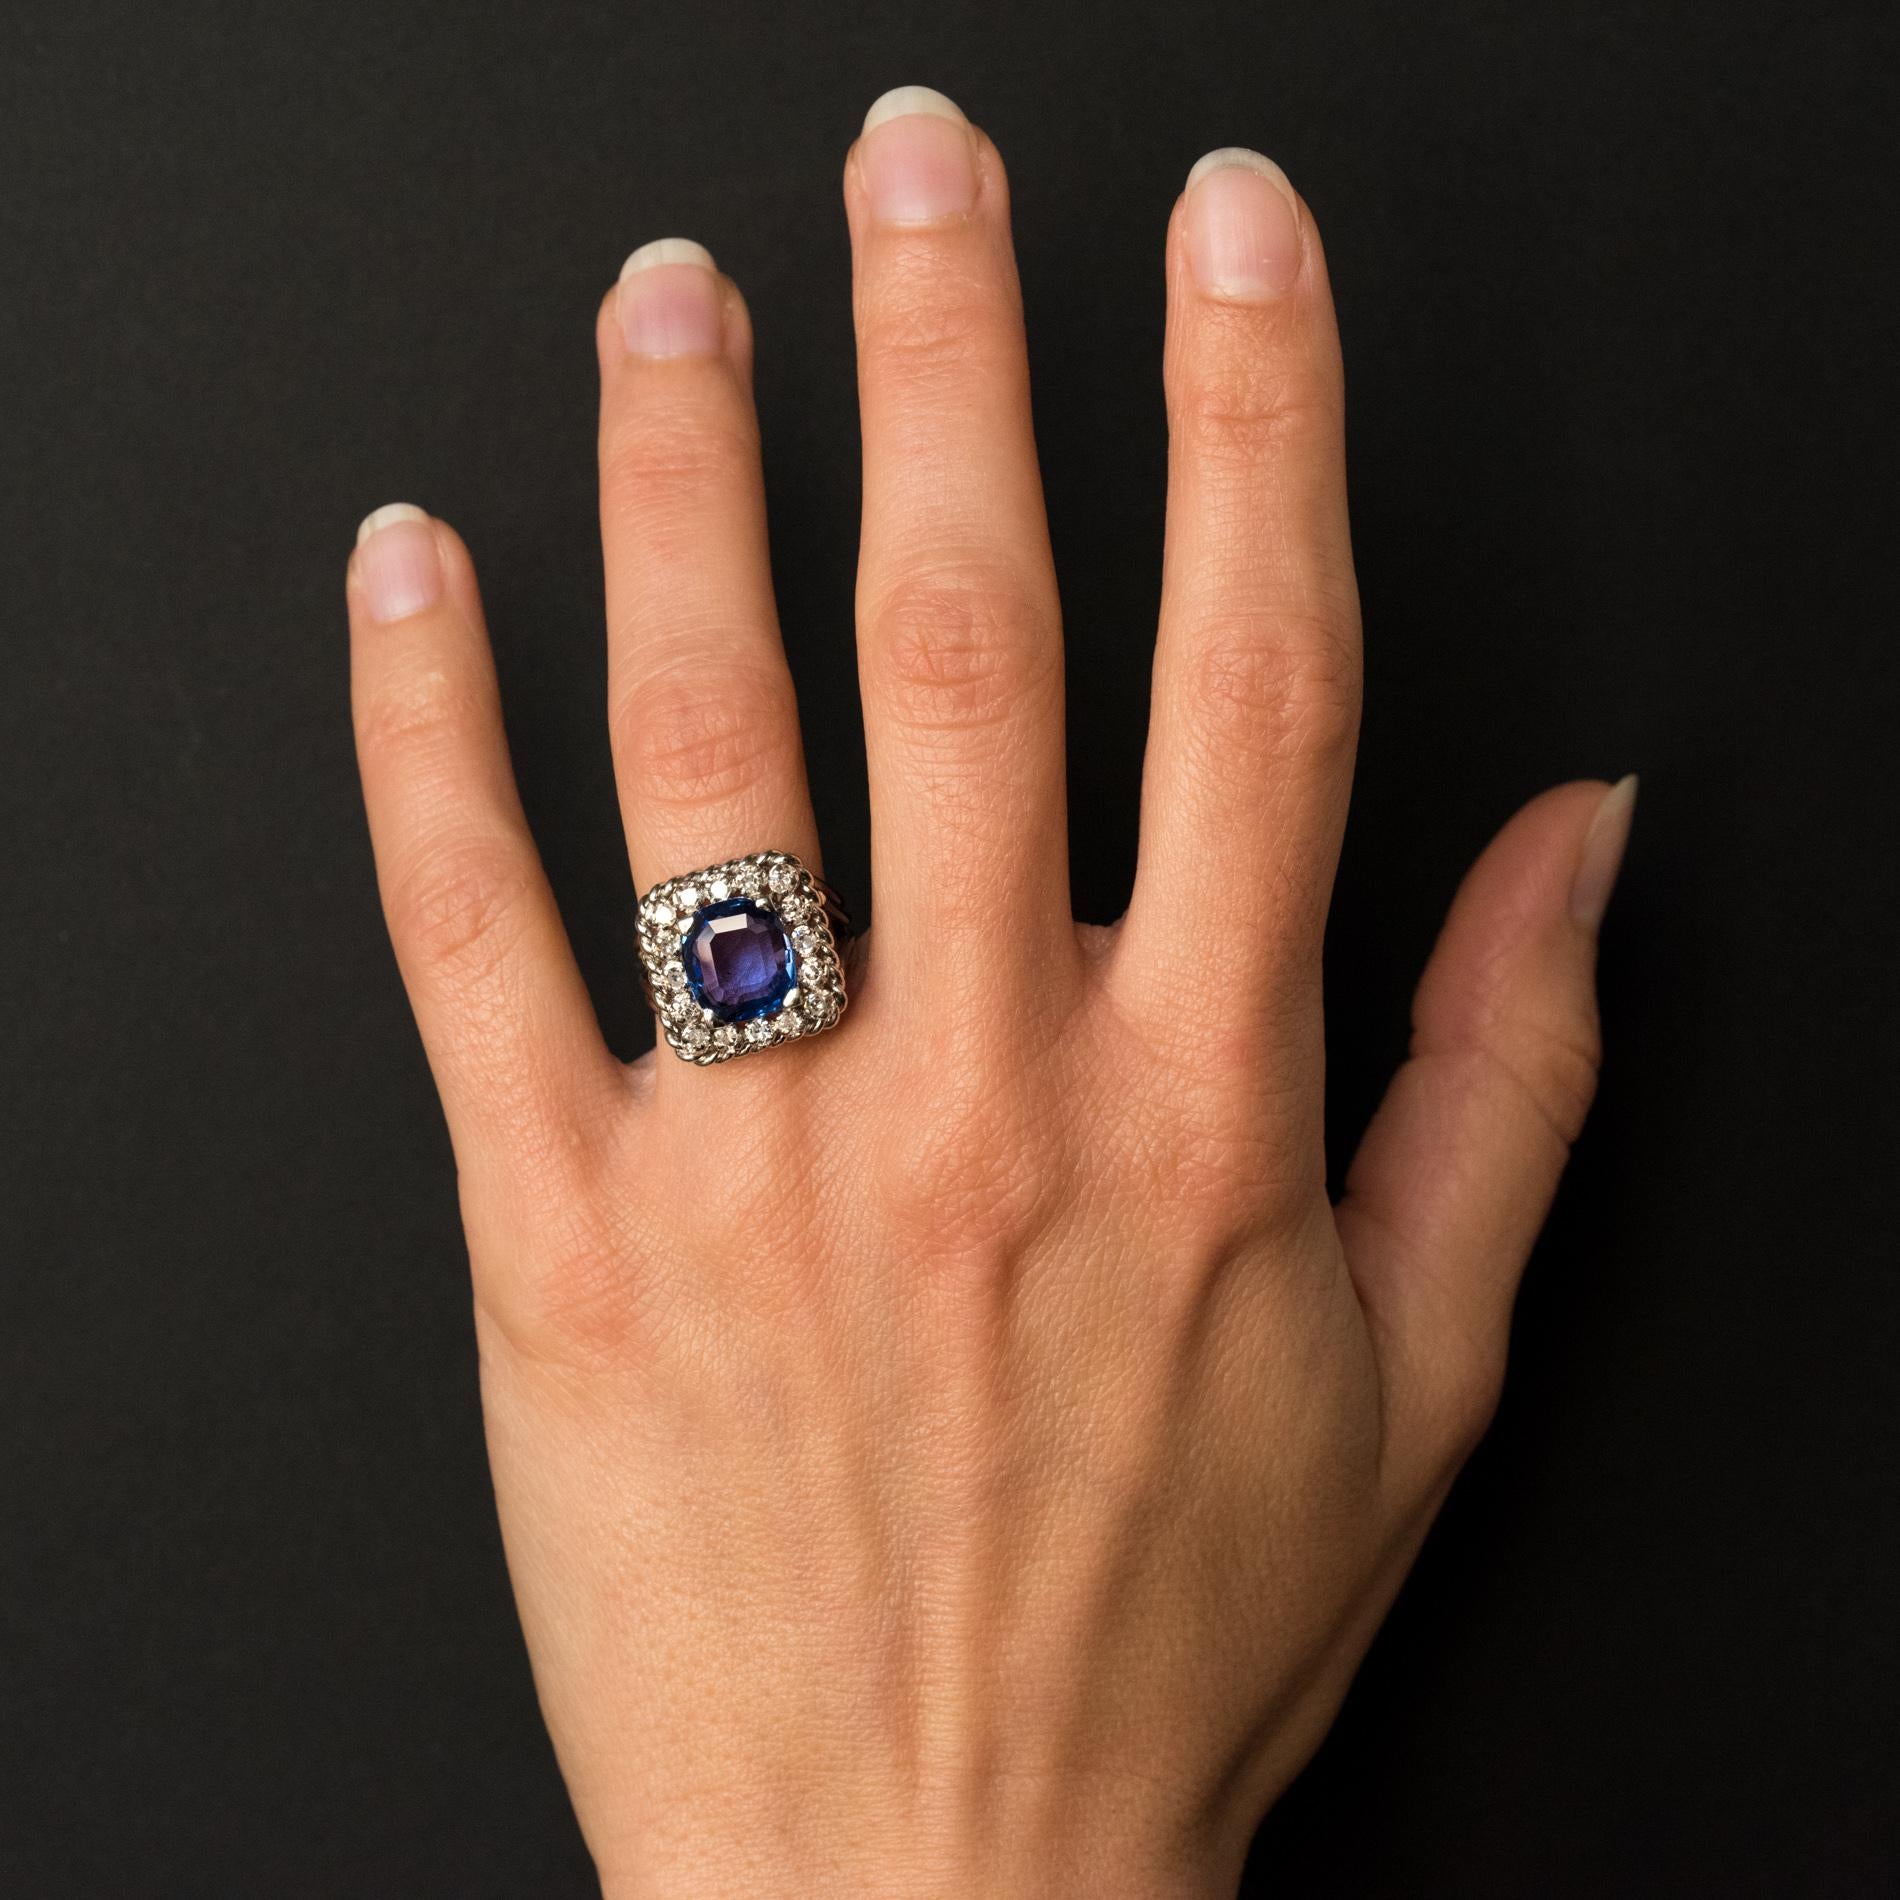 Ring in platinum, dog's head hallmark.
Rectangular, this sublime retro ring is set with 4 claws of a cushion- cut blue sapphire surrounded by 16 diamonds, all lined with a twist. The ring consists of 4 threads that meet at the base.
Sapphire weight: